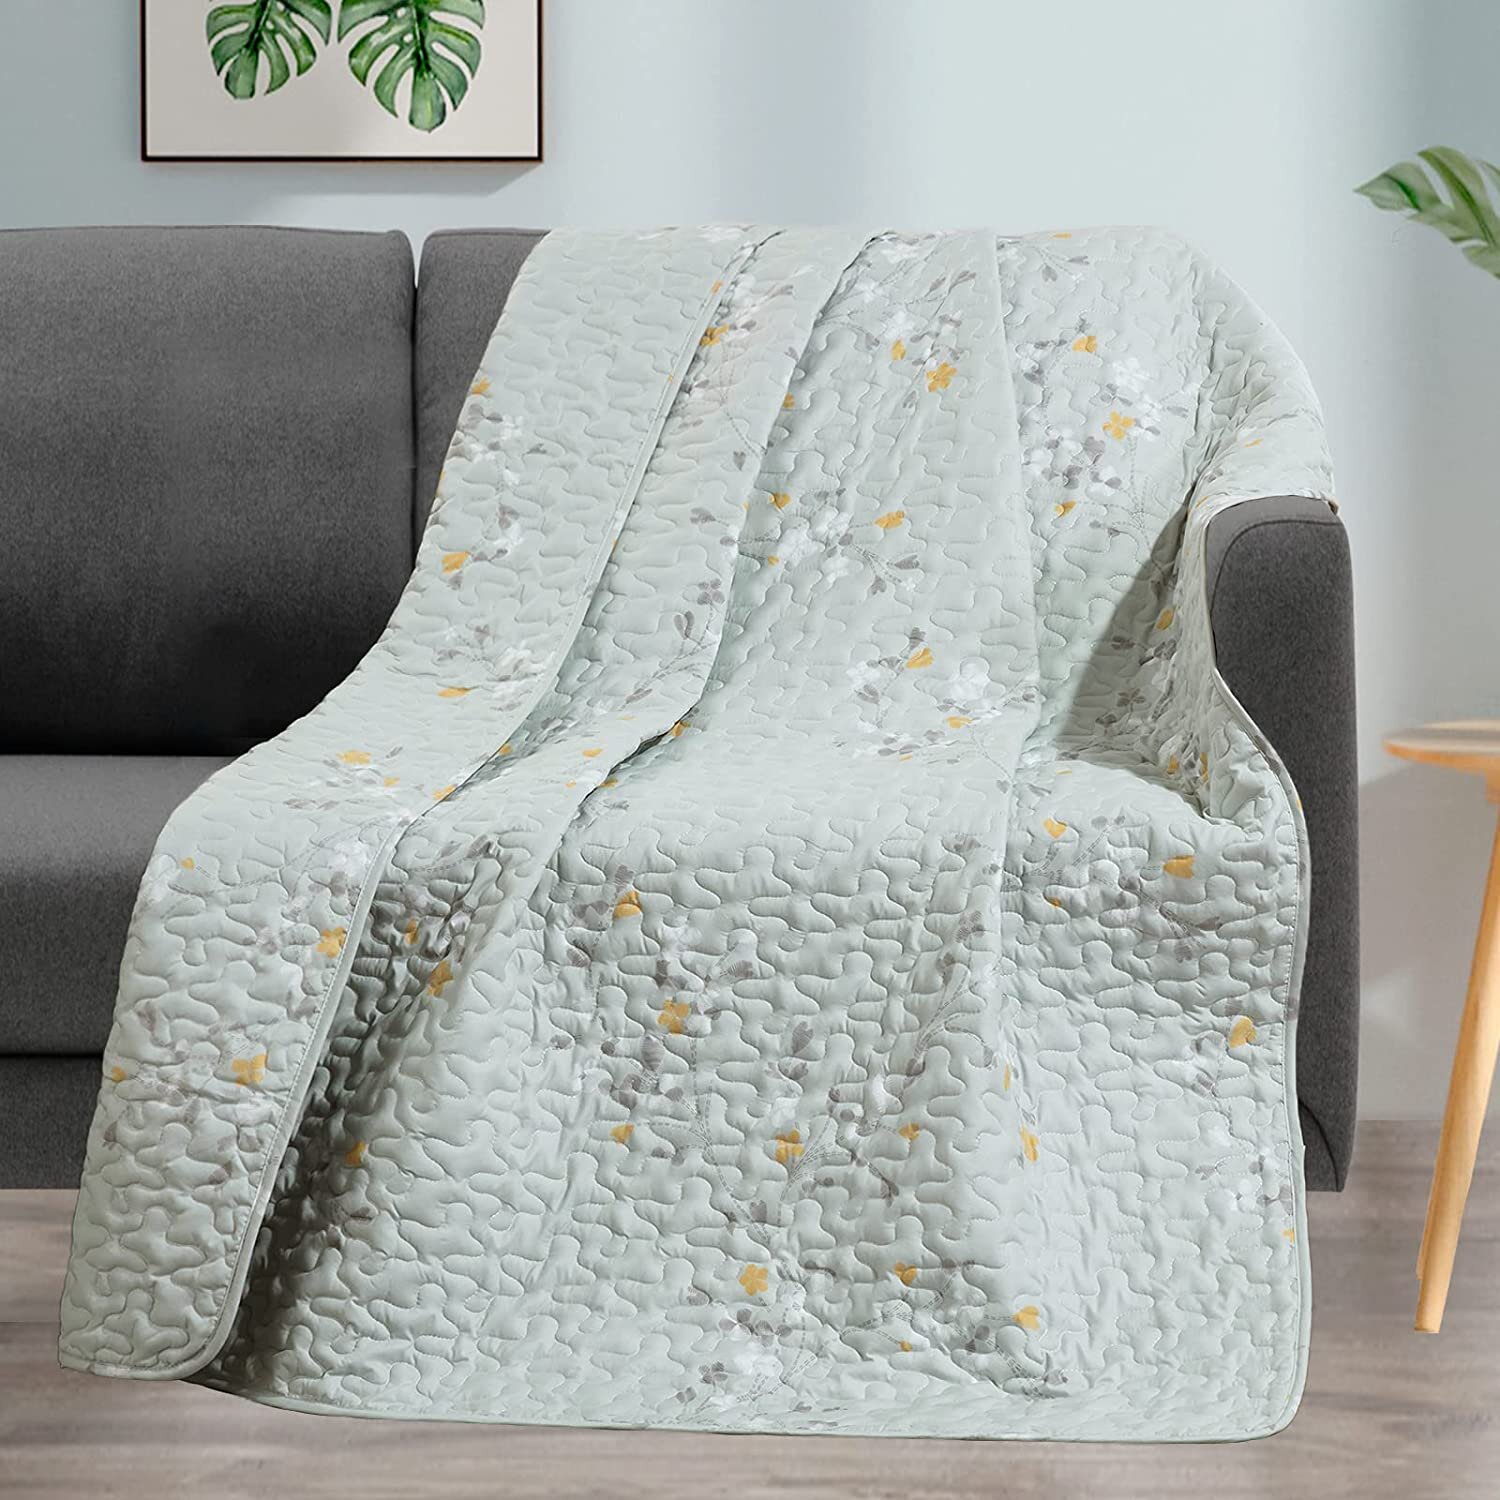 Light Bed Blanket Floral Flowers Pattern Flannel Fleece Throw Blankets for Couch Bed Sofa 60x80 